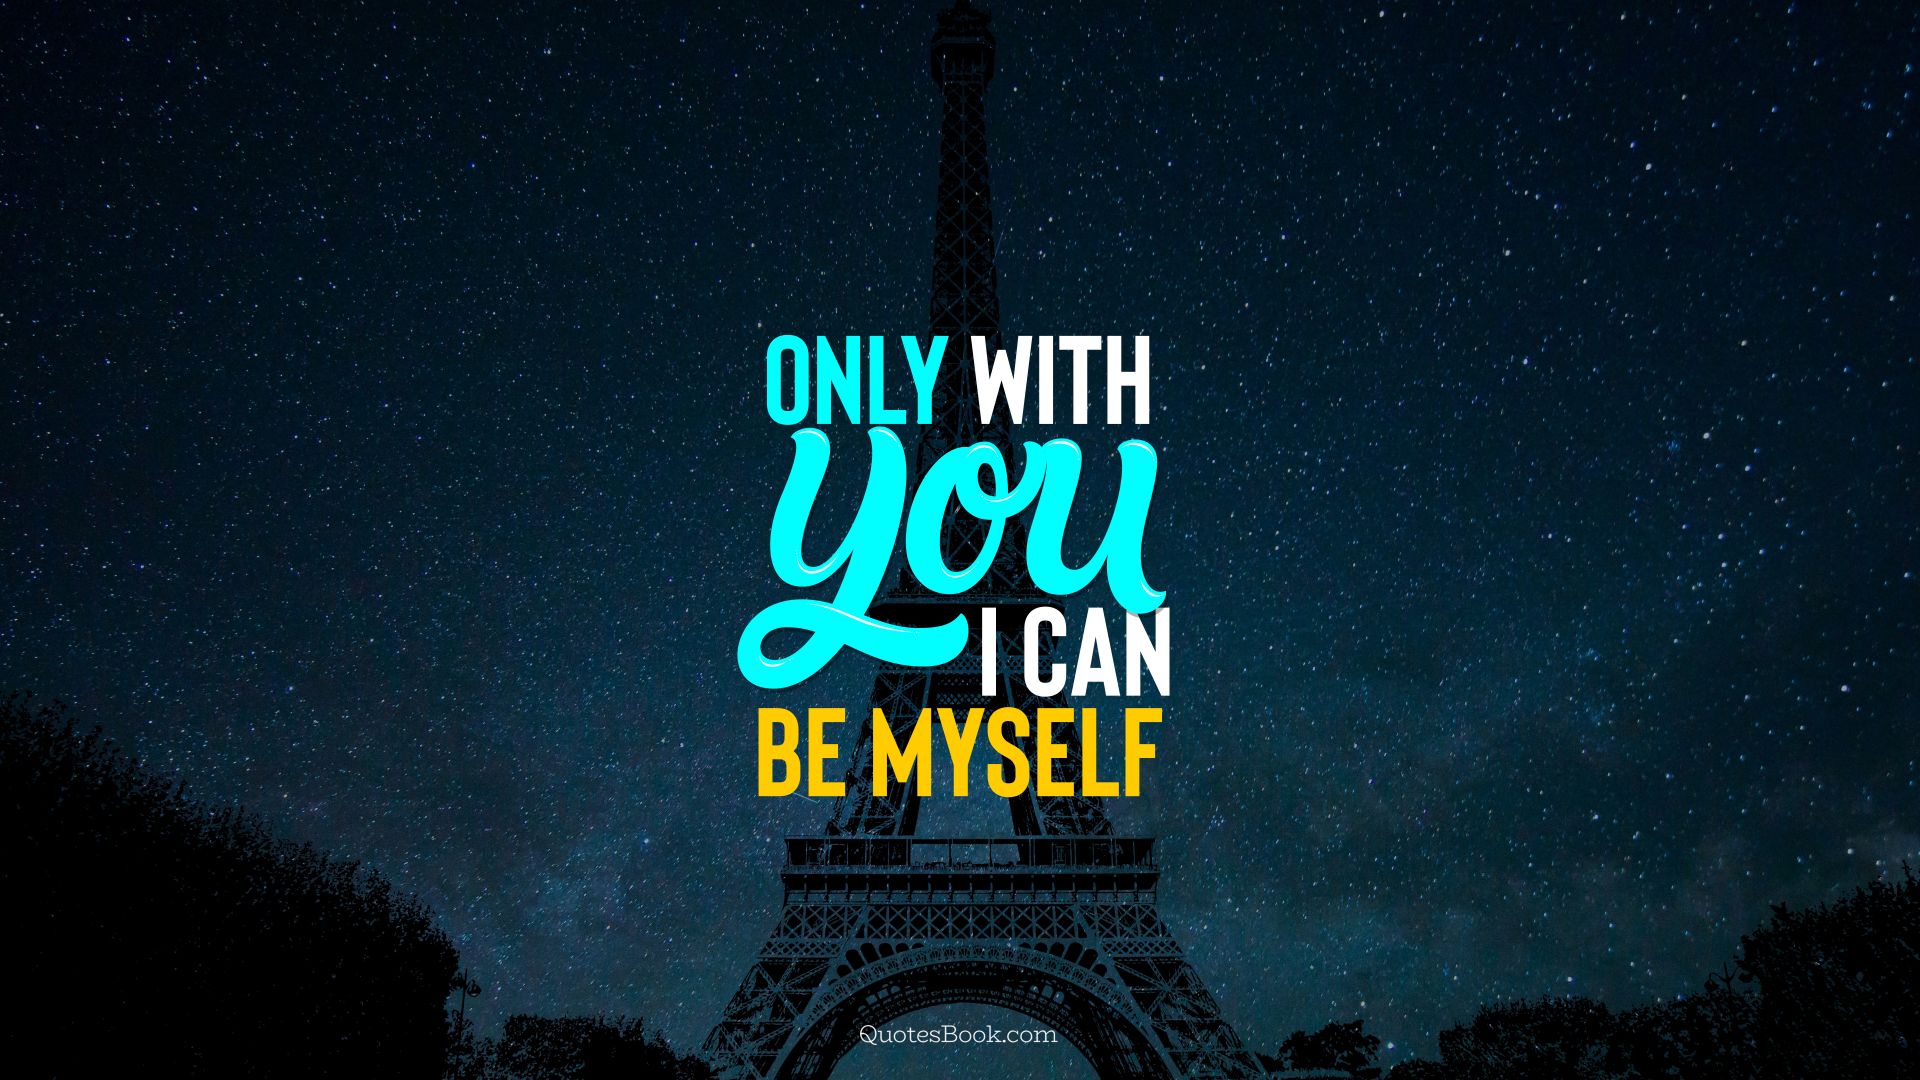 Only with you  I can be myself. - Quote by QuotesBook